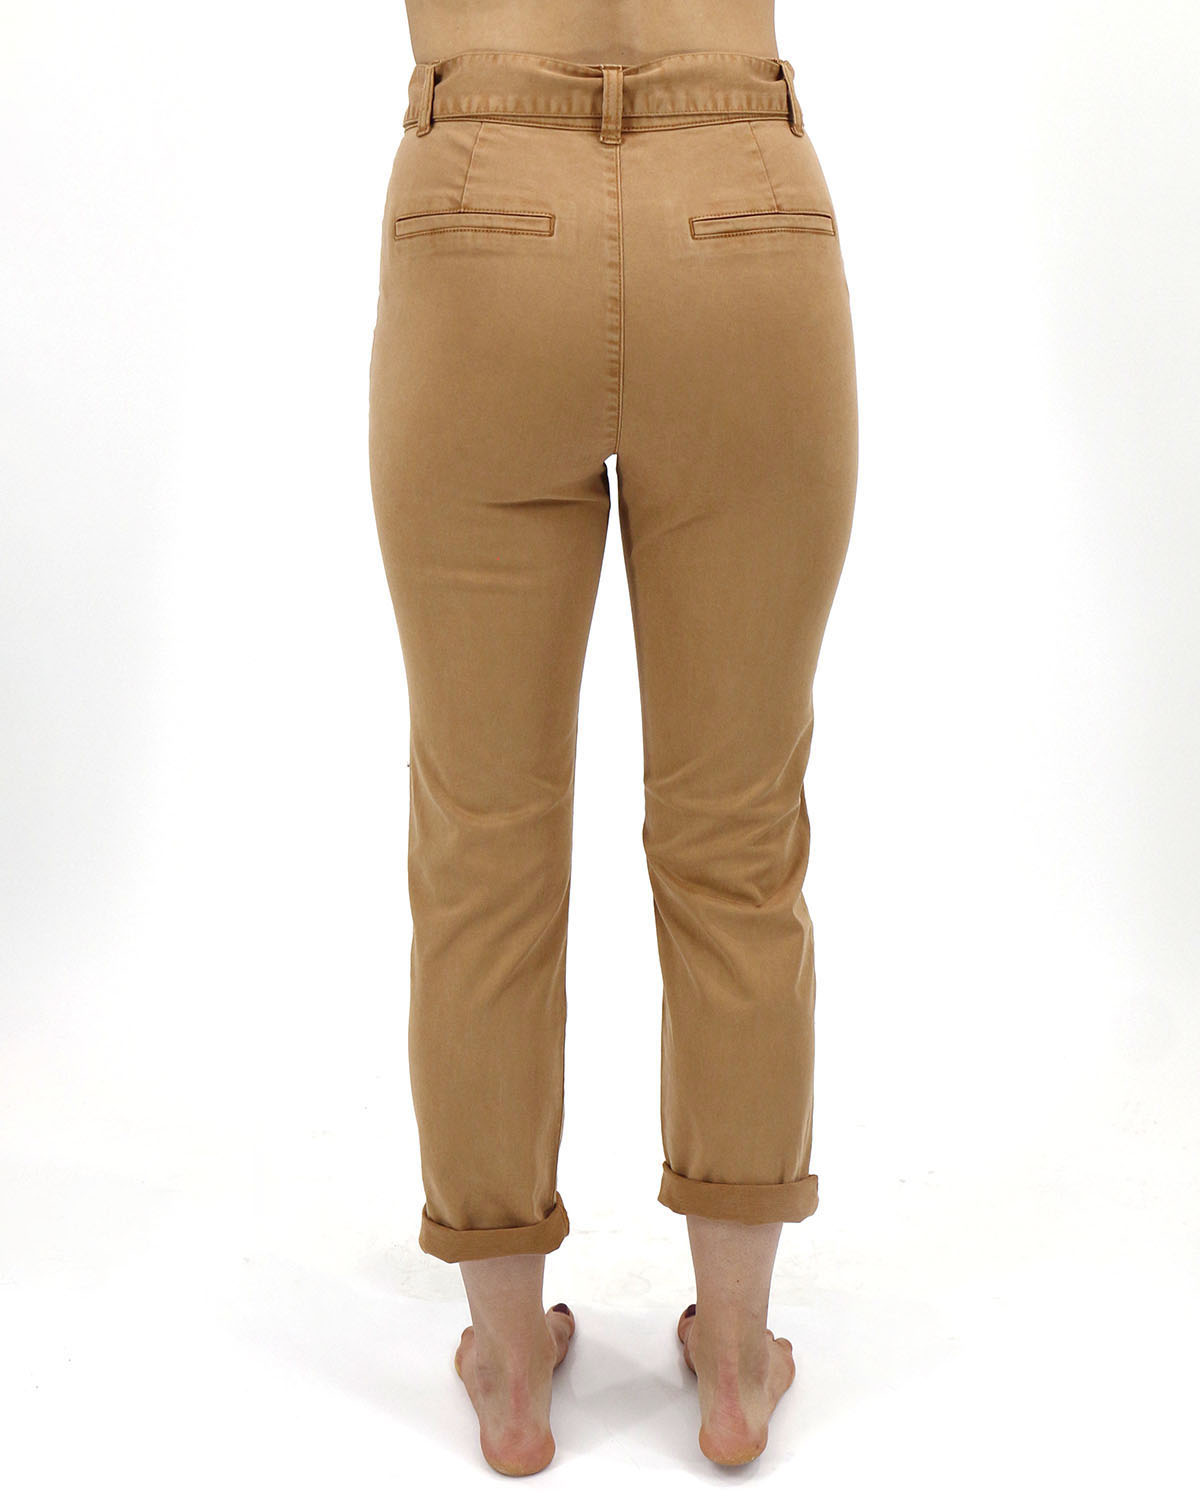 Sueded Twill Khaki Cargo Pants - Grace and Lace